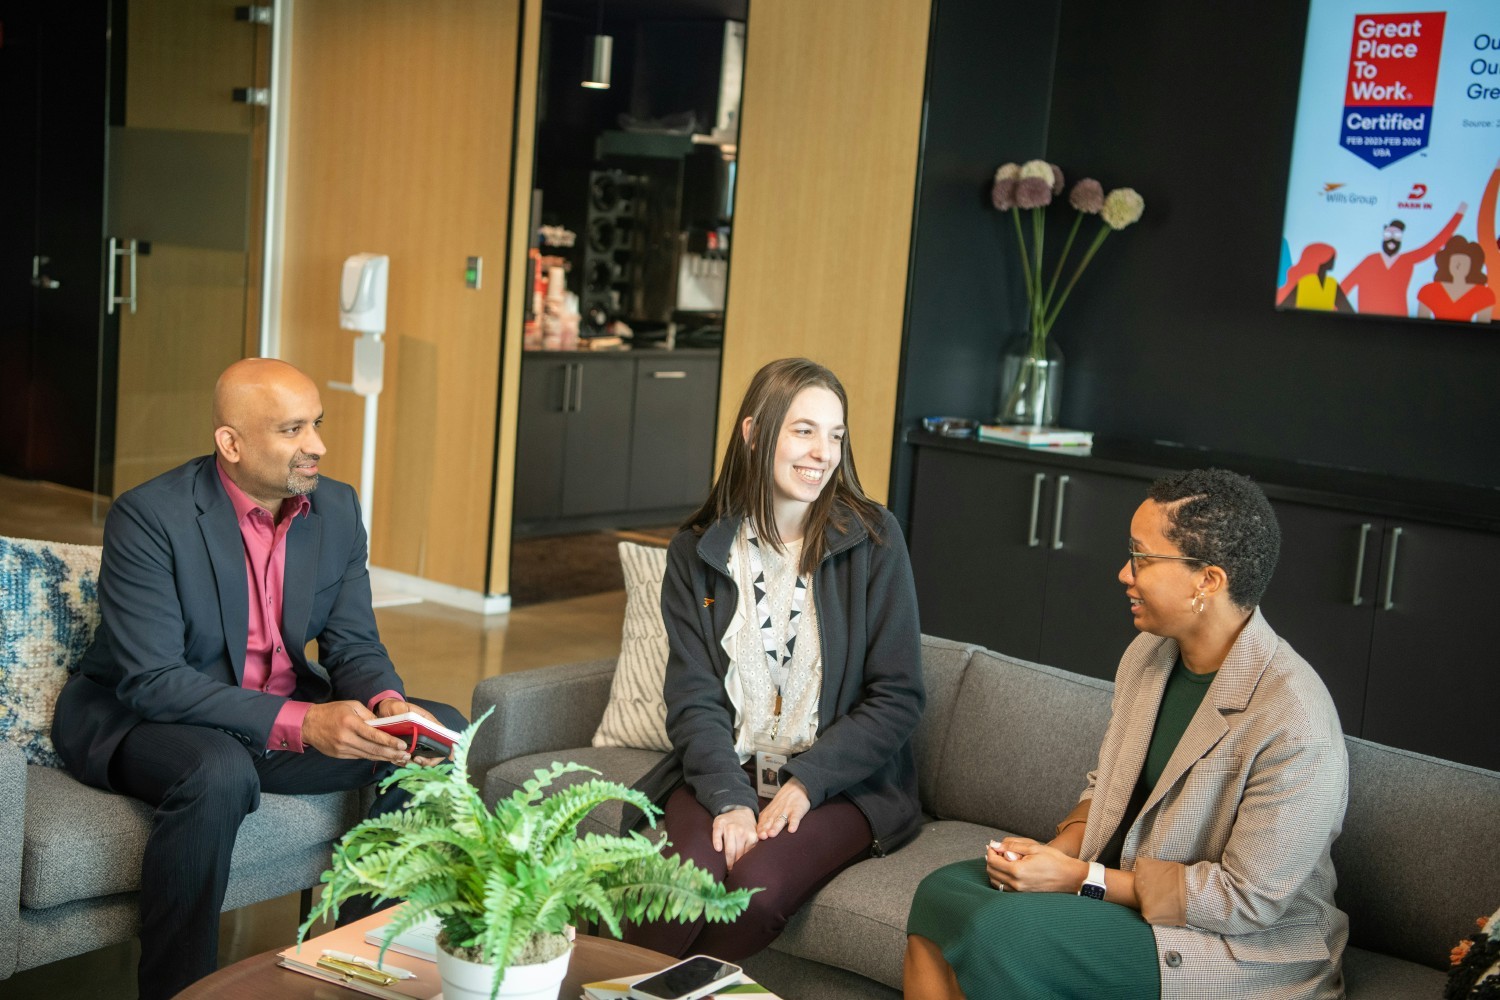 Diverse groups of employees discuss what it means to be a Great Place to Work. 